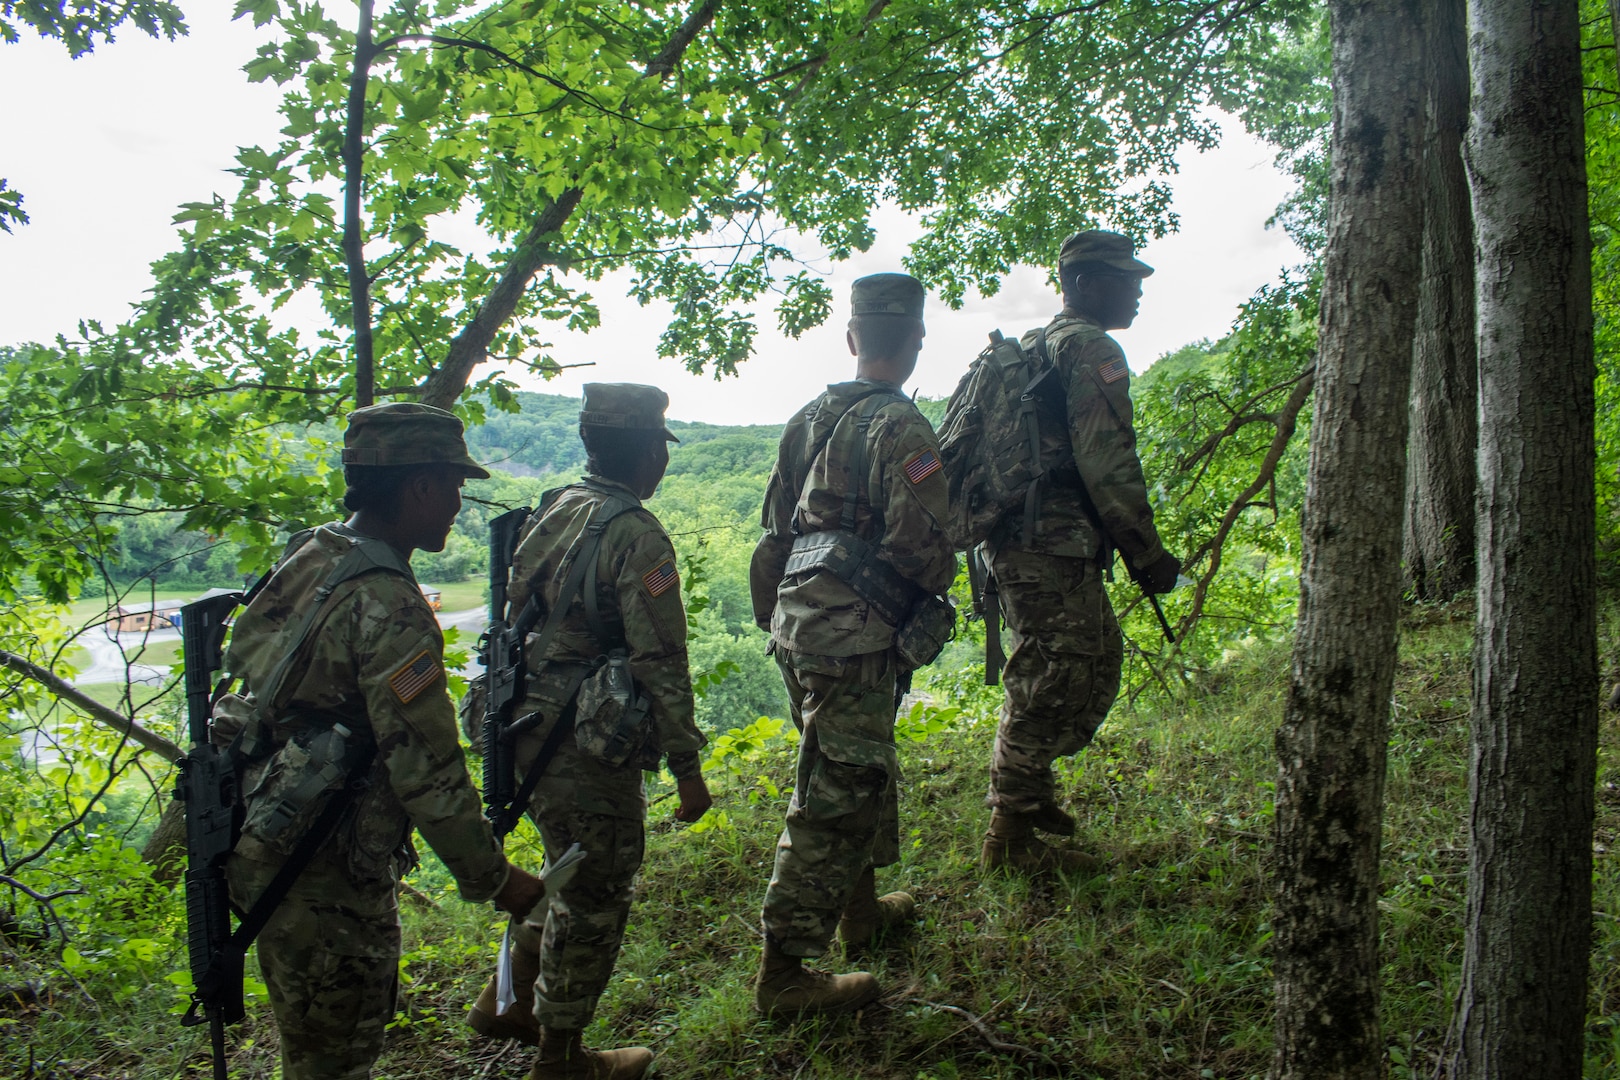 New York Army National Guard Soldiers assigned to 3rd Battalion, 142nd Aviation Regiment, find their way during land navigation training as part of their annual training at the Guilderland Range in Guilderland, New York, July 29, 2020.